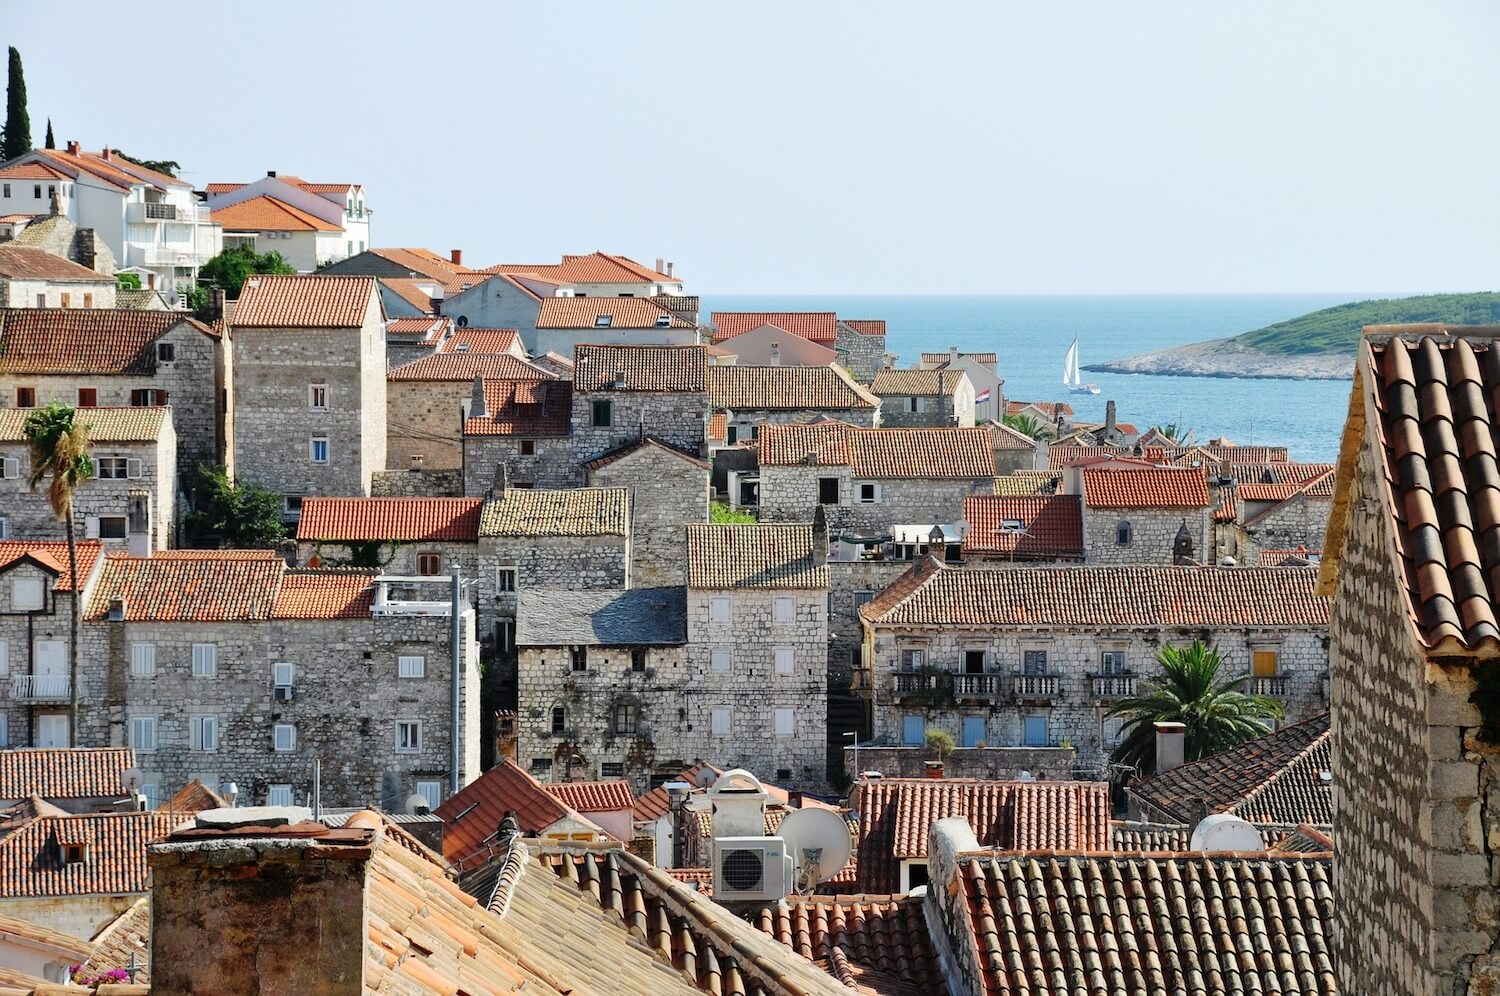 Eclectic array of rooftops of Hvar